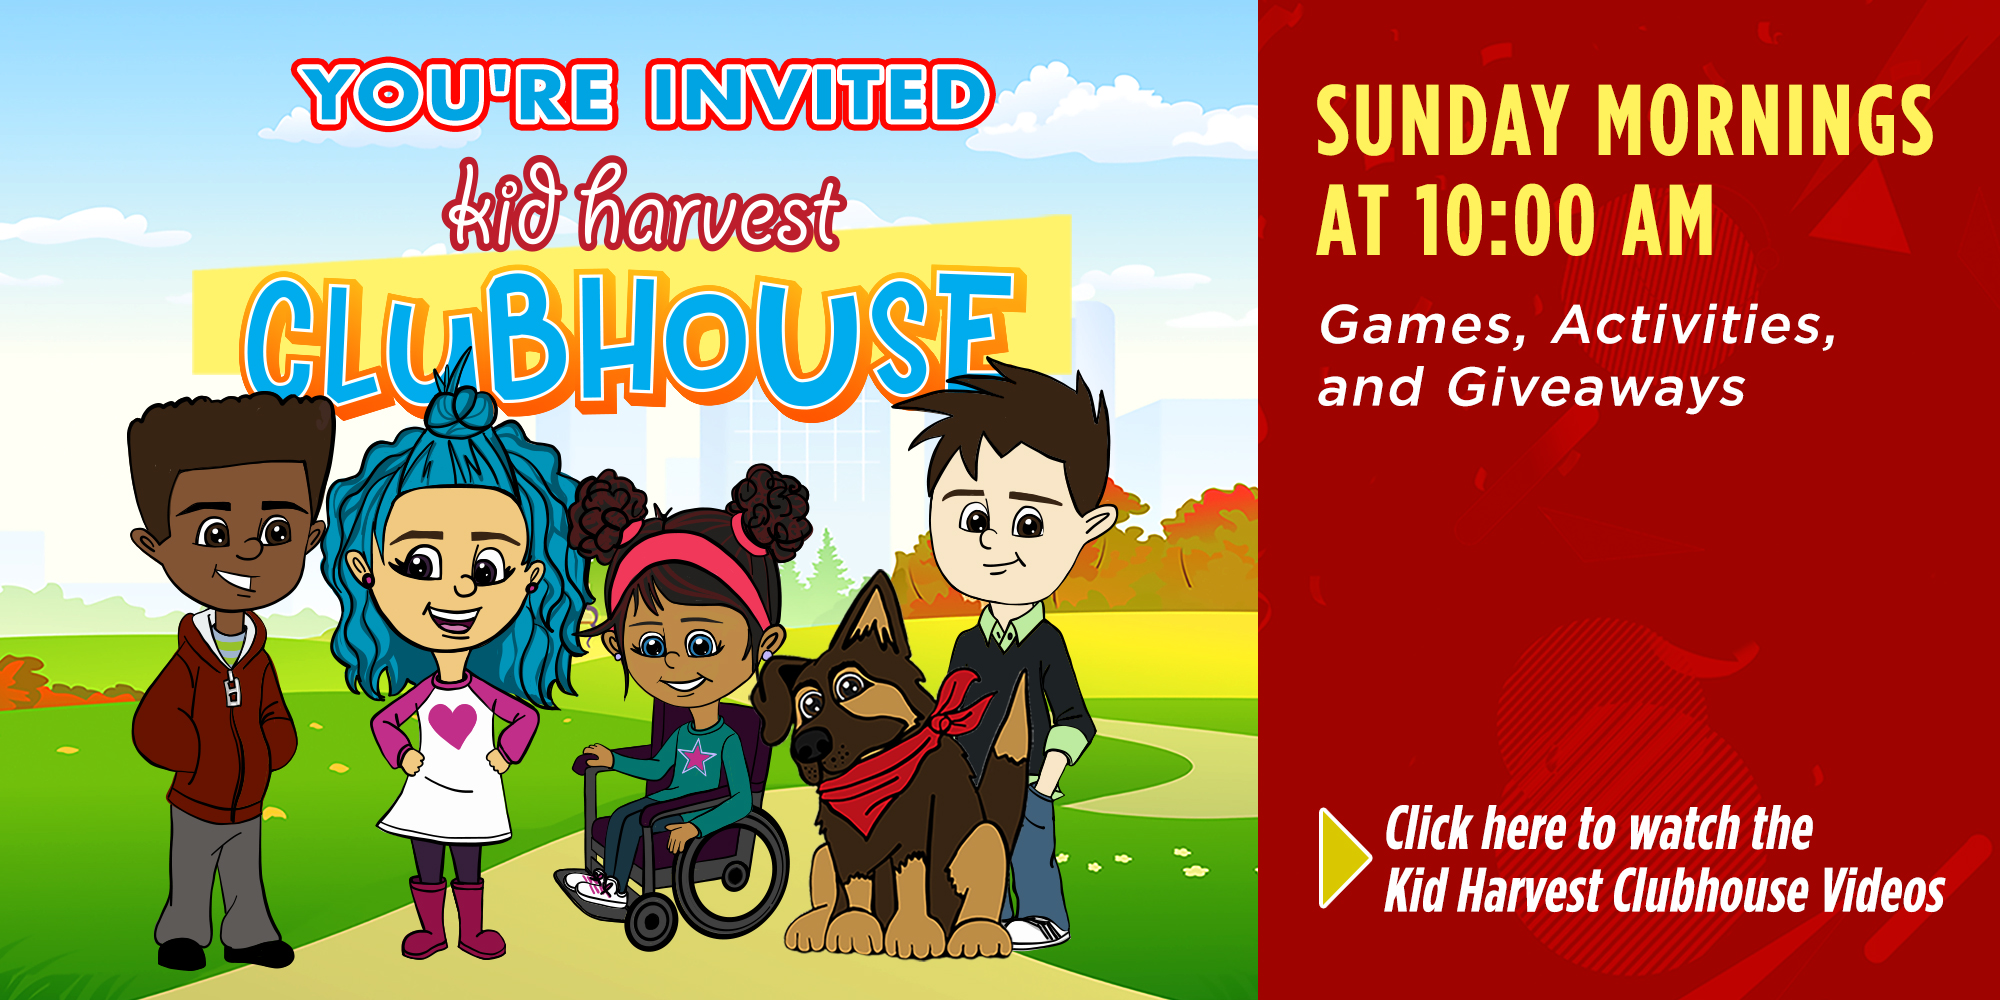 Kid Harvest Clubhouse Sunday Mornings at 10AM Games, Activites, and Giveaways Click Here to Watch the Kid Harvest Clubhouse Videos